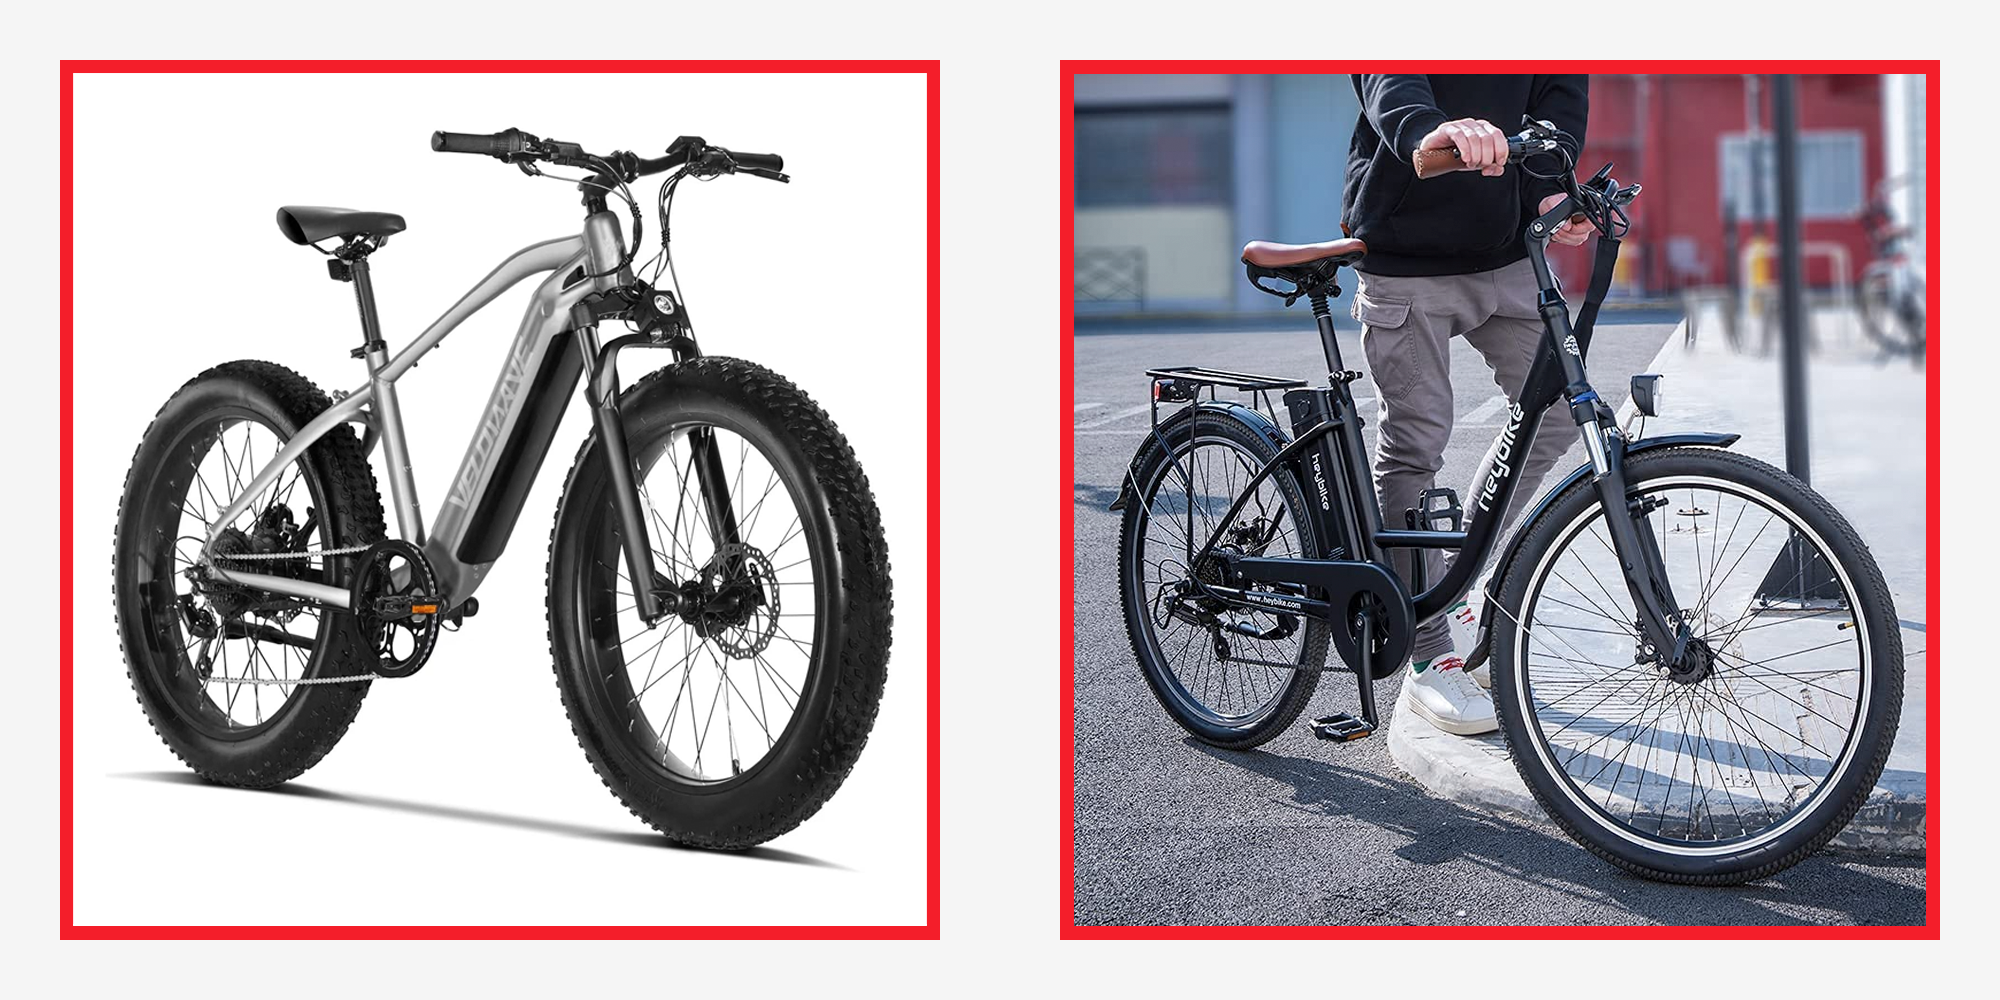 Amazon Prime Early Access Sale The Best E-bike Sales to Shop Now